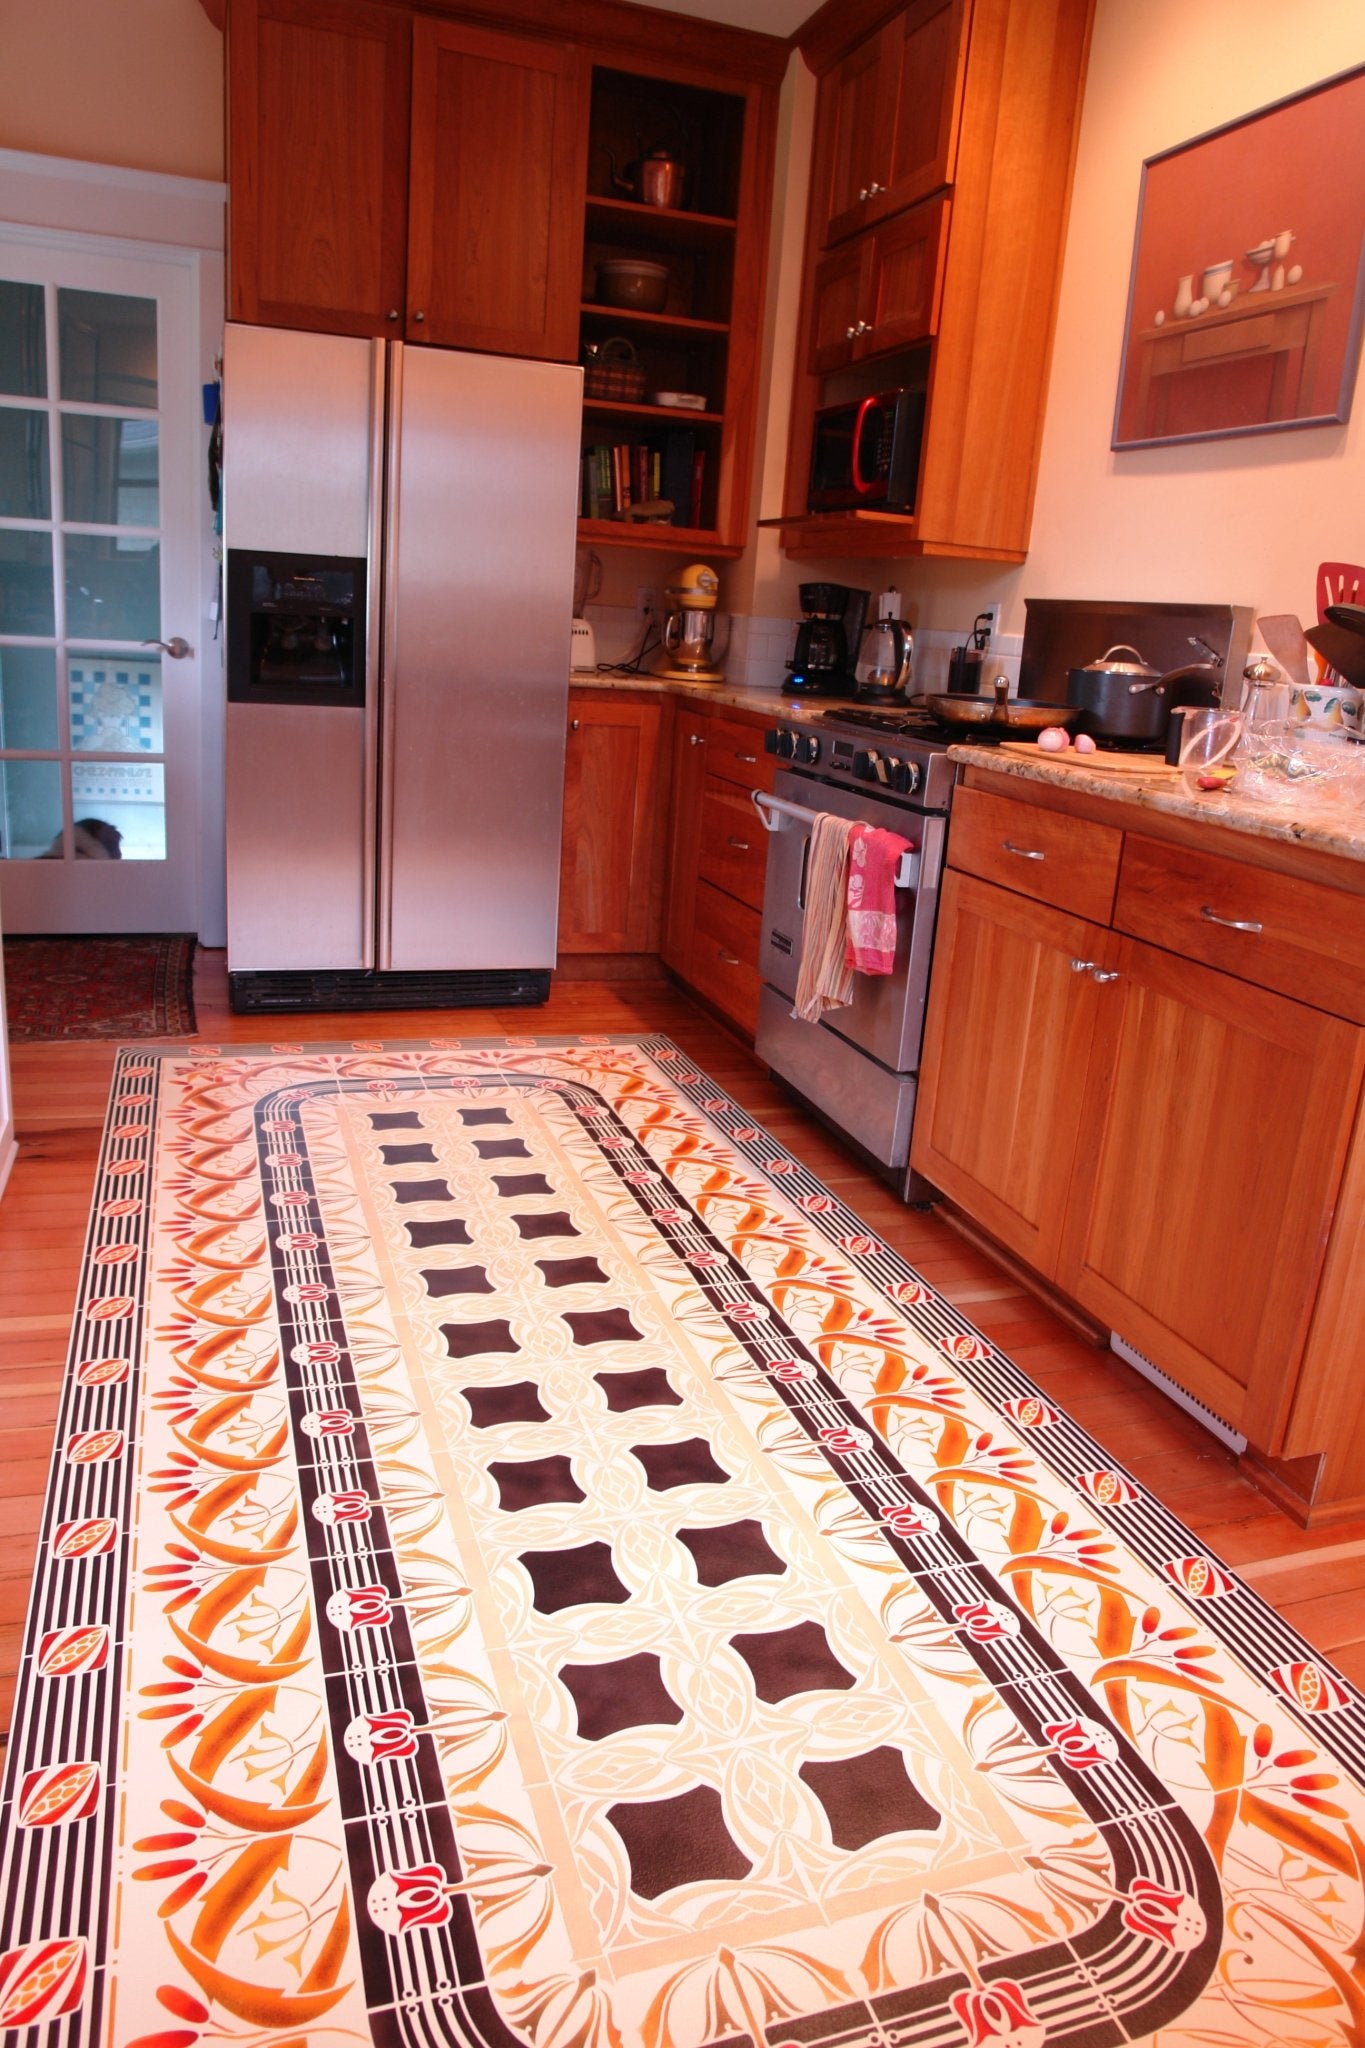 Another in-situ image of Wunderlich Floorcloth #2.